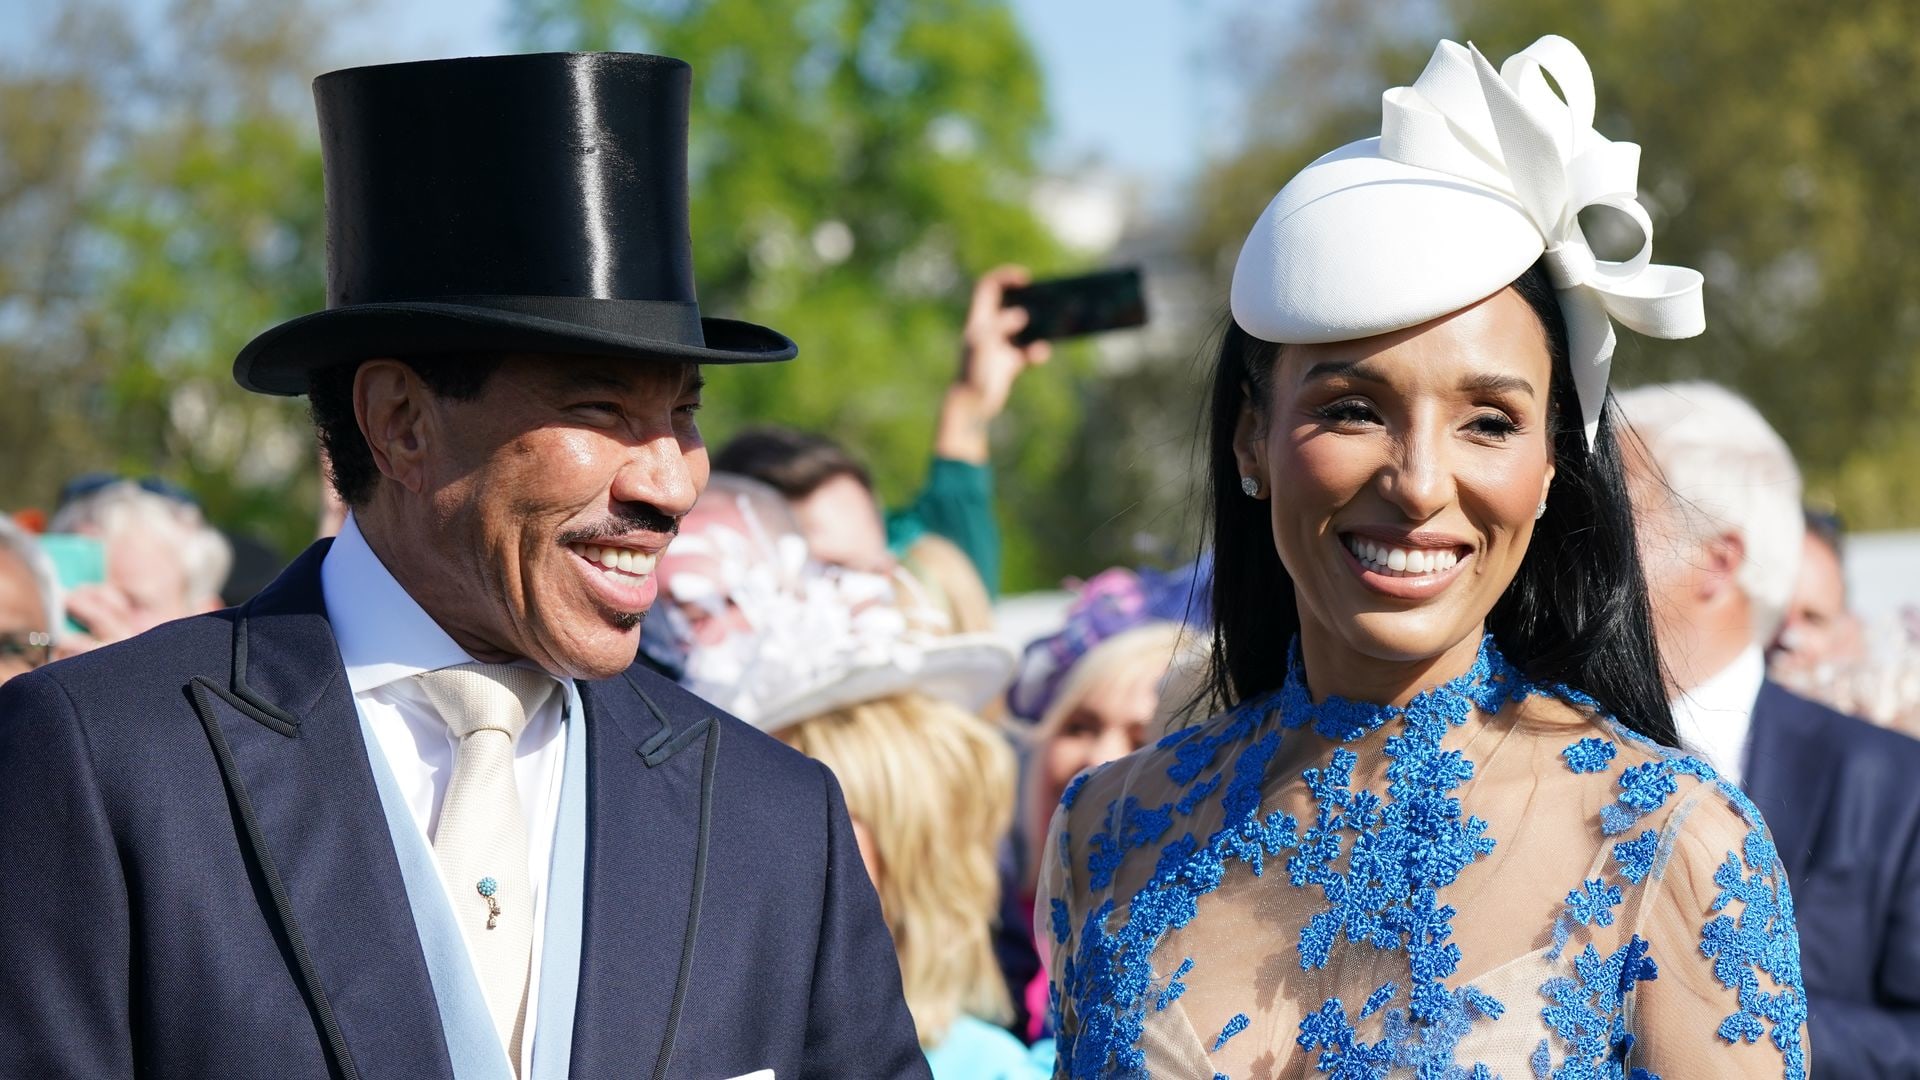 Lionel Richie and Lisa Parigi attend garden party ahead of Coronation of King Charles 